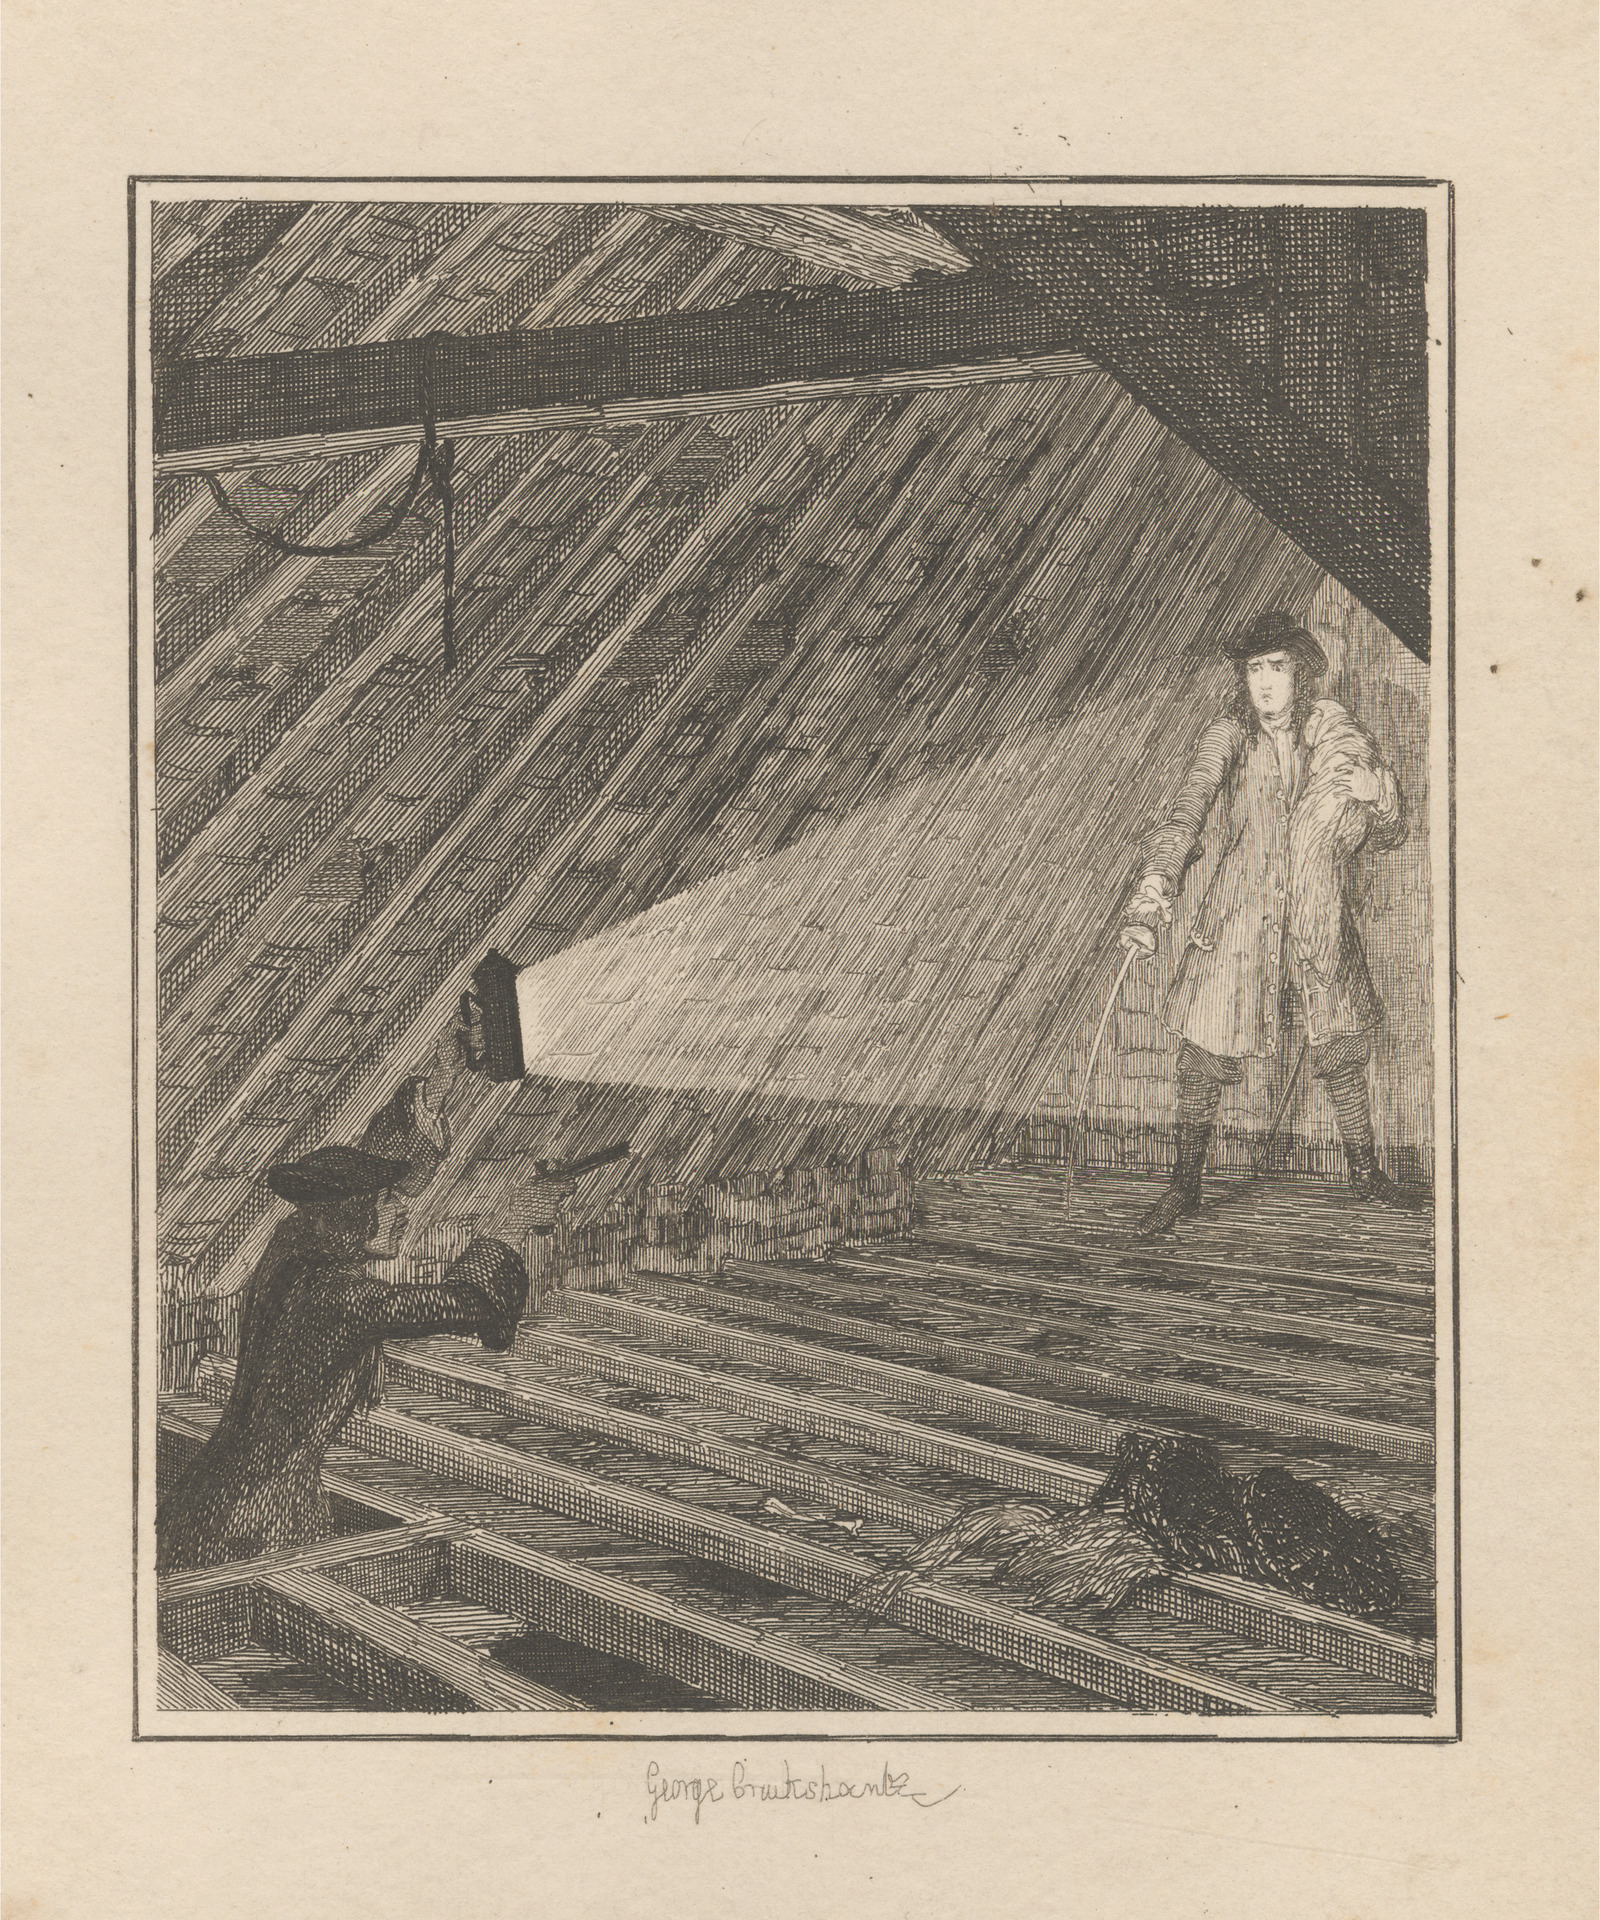 Jonathan Wild Discovers Darrell in the Loft, Print made by George Cruikshank, 1792-1878